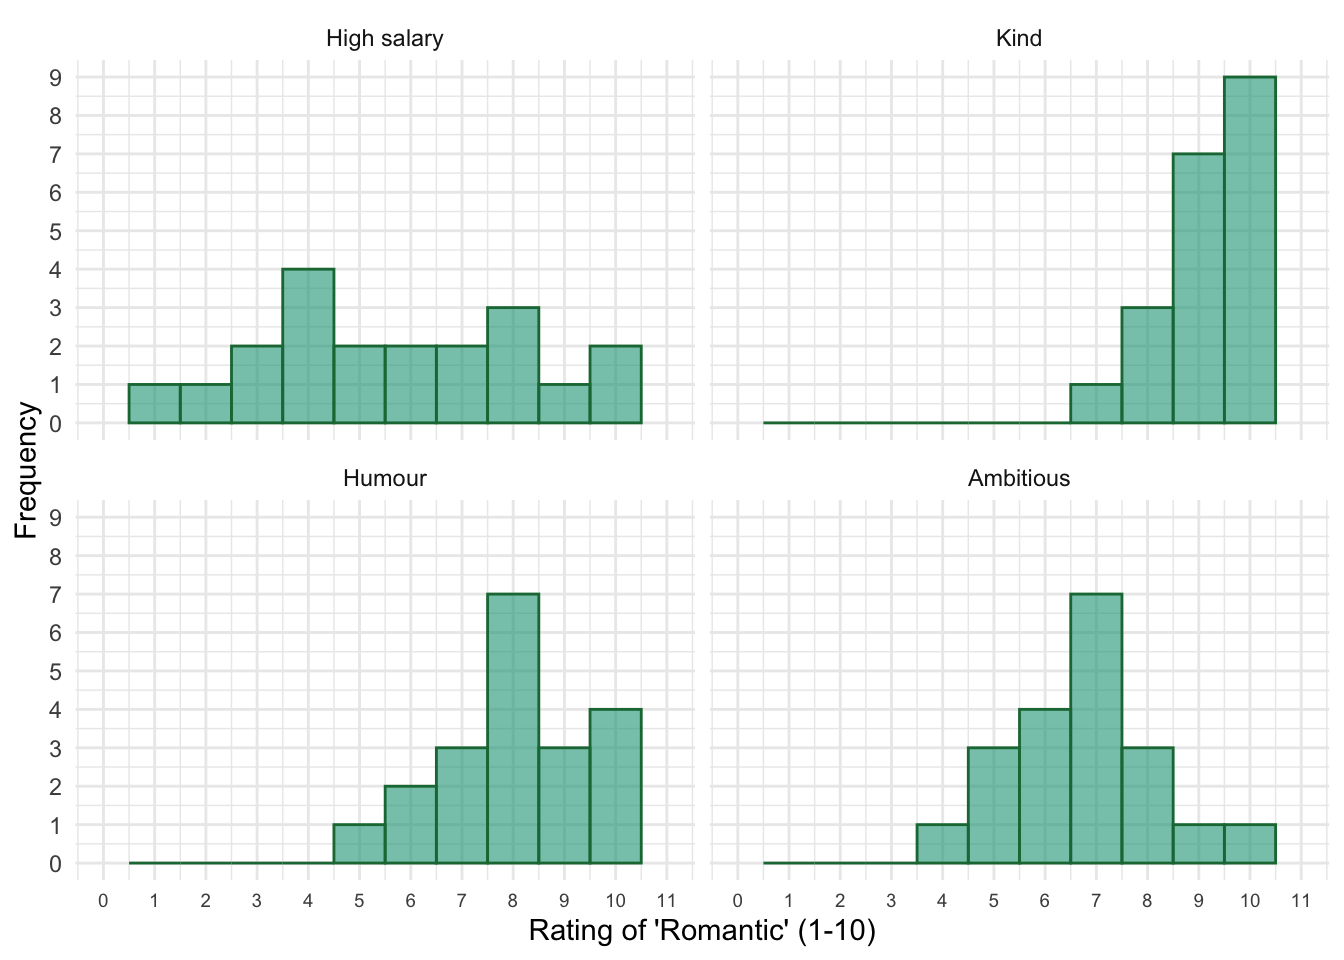 Figure 3.1 (reproduced): Histograms of the importance of four characteristics in their partners